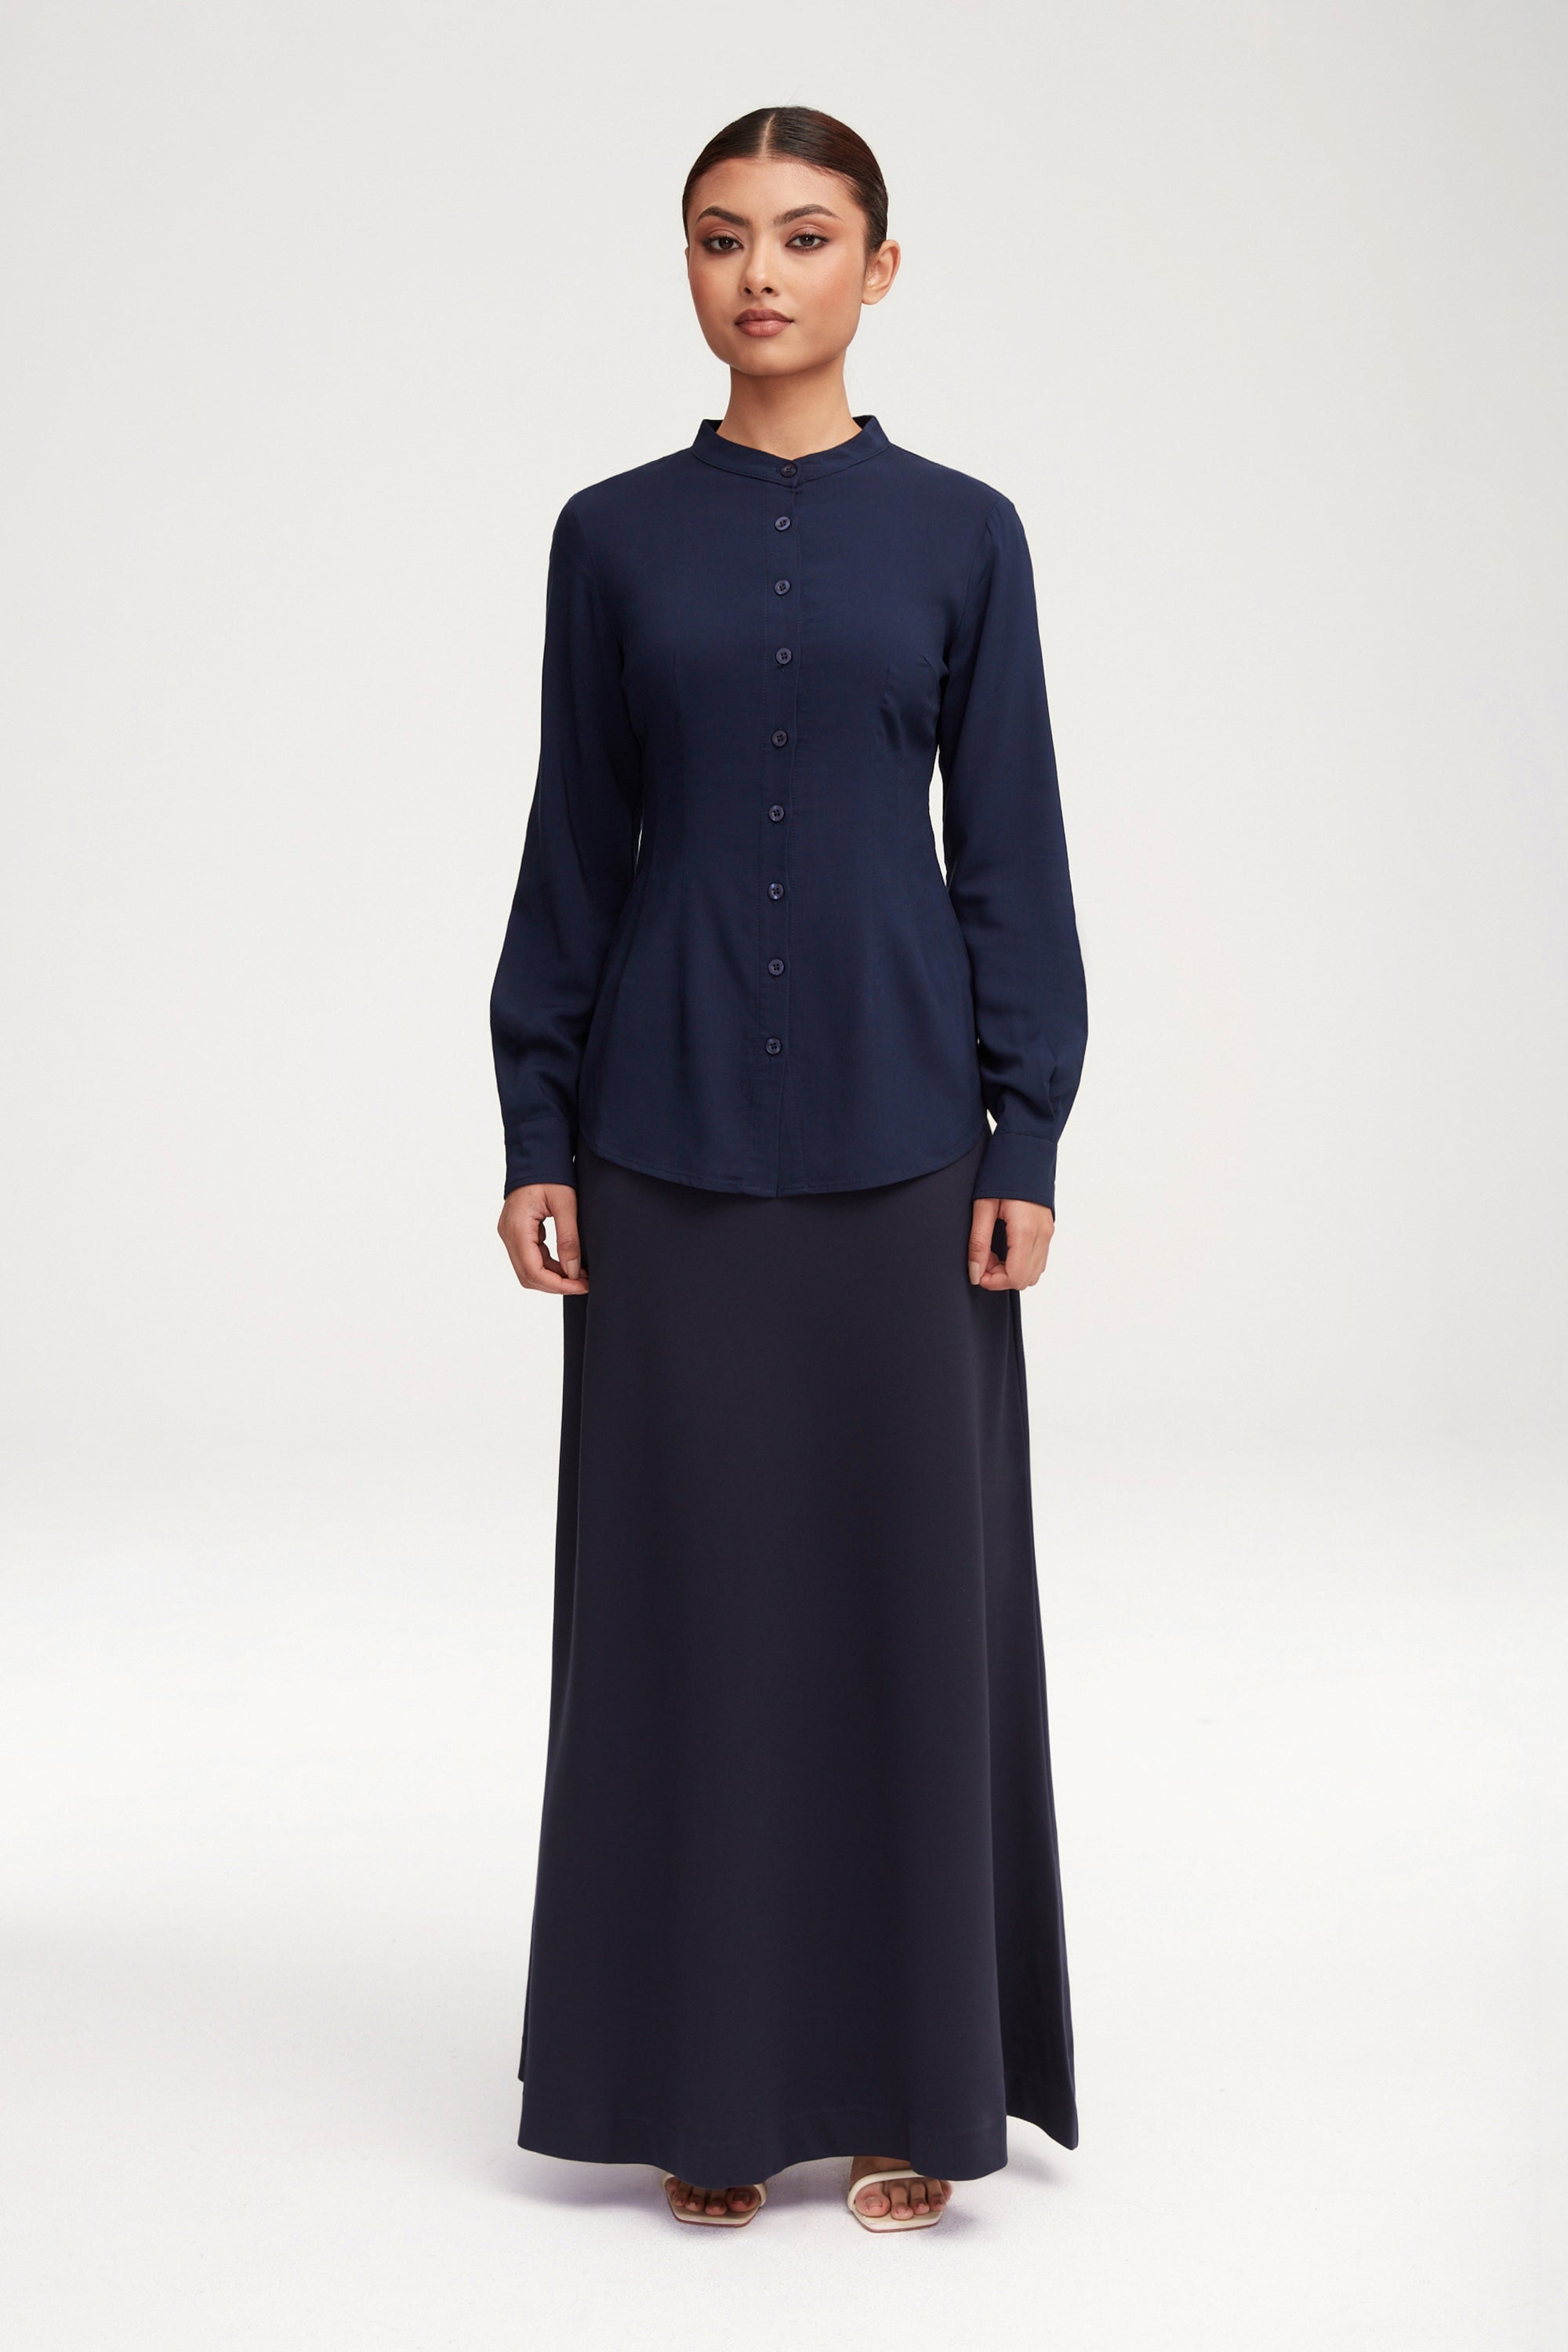 Essential Jersey A-Line Maxi Skirt - Navy Blue Clothing Veiled 